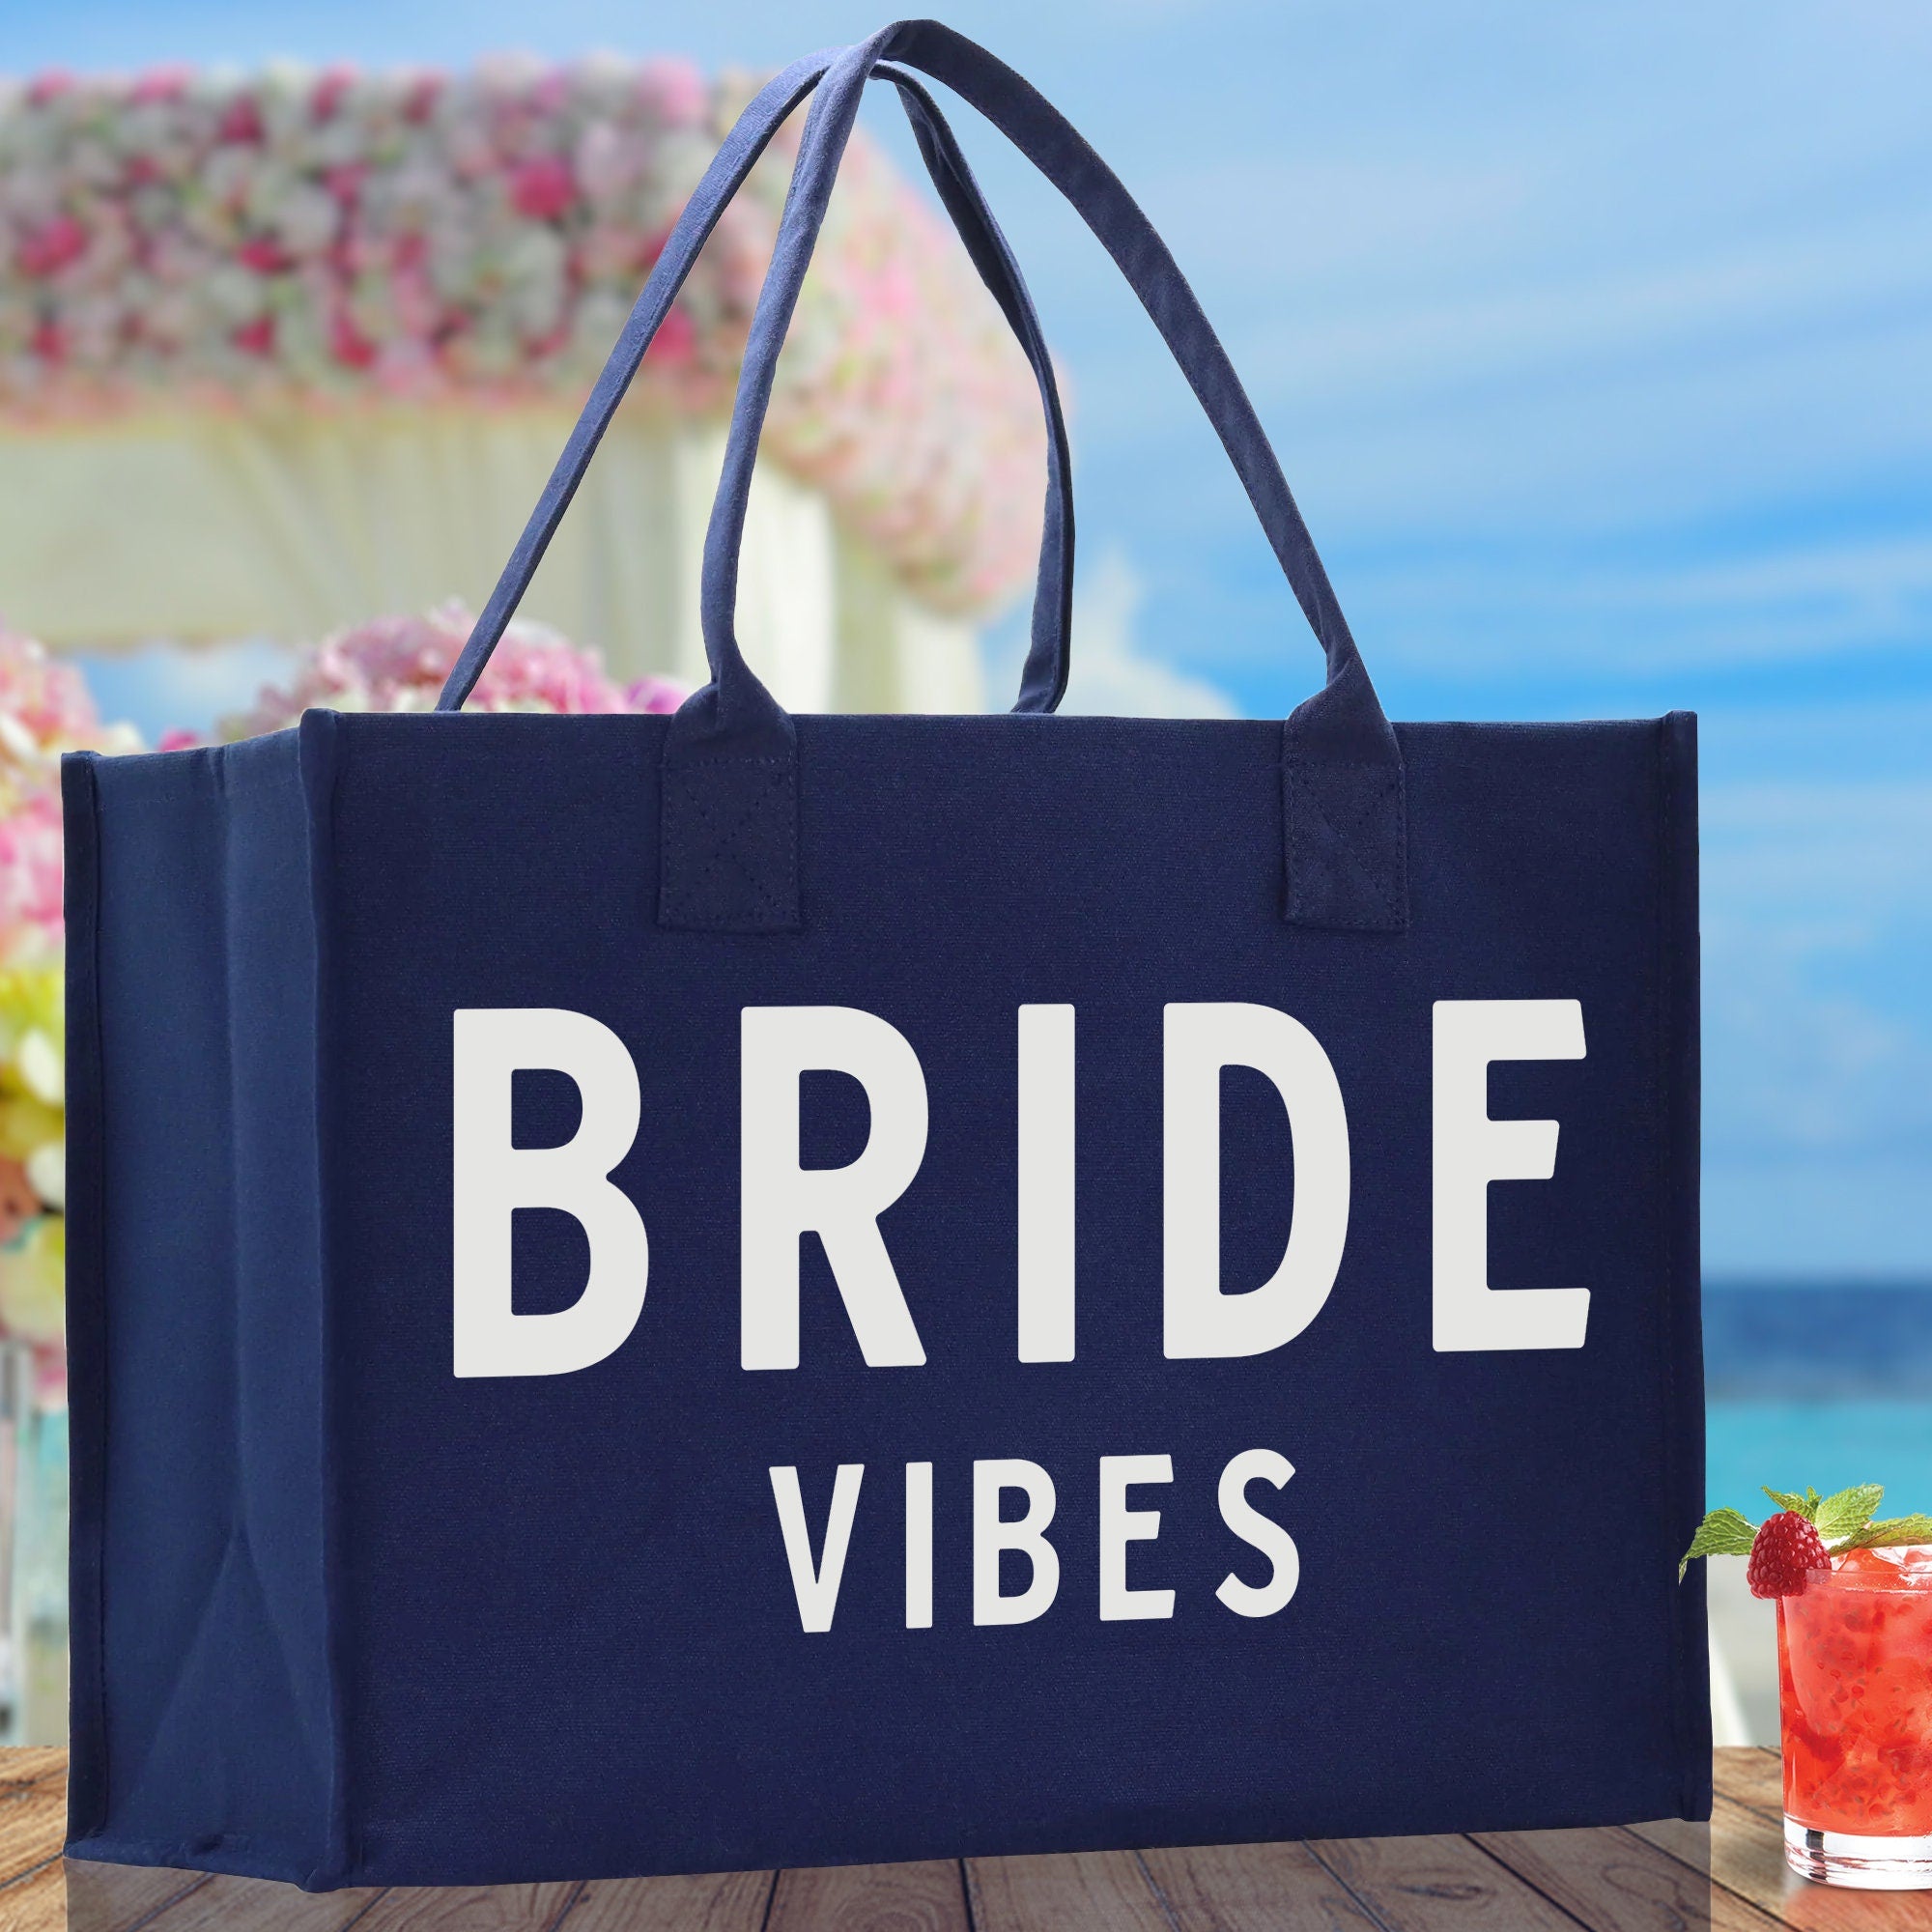 Bride Vibes Cotton Canvas Chic Beach Tote Bag Multipurpose Tote Weekender Tote Gift for Her Outdoor Tote Vacation Tote Large Beach Bag